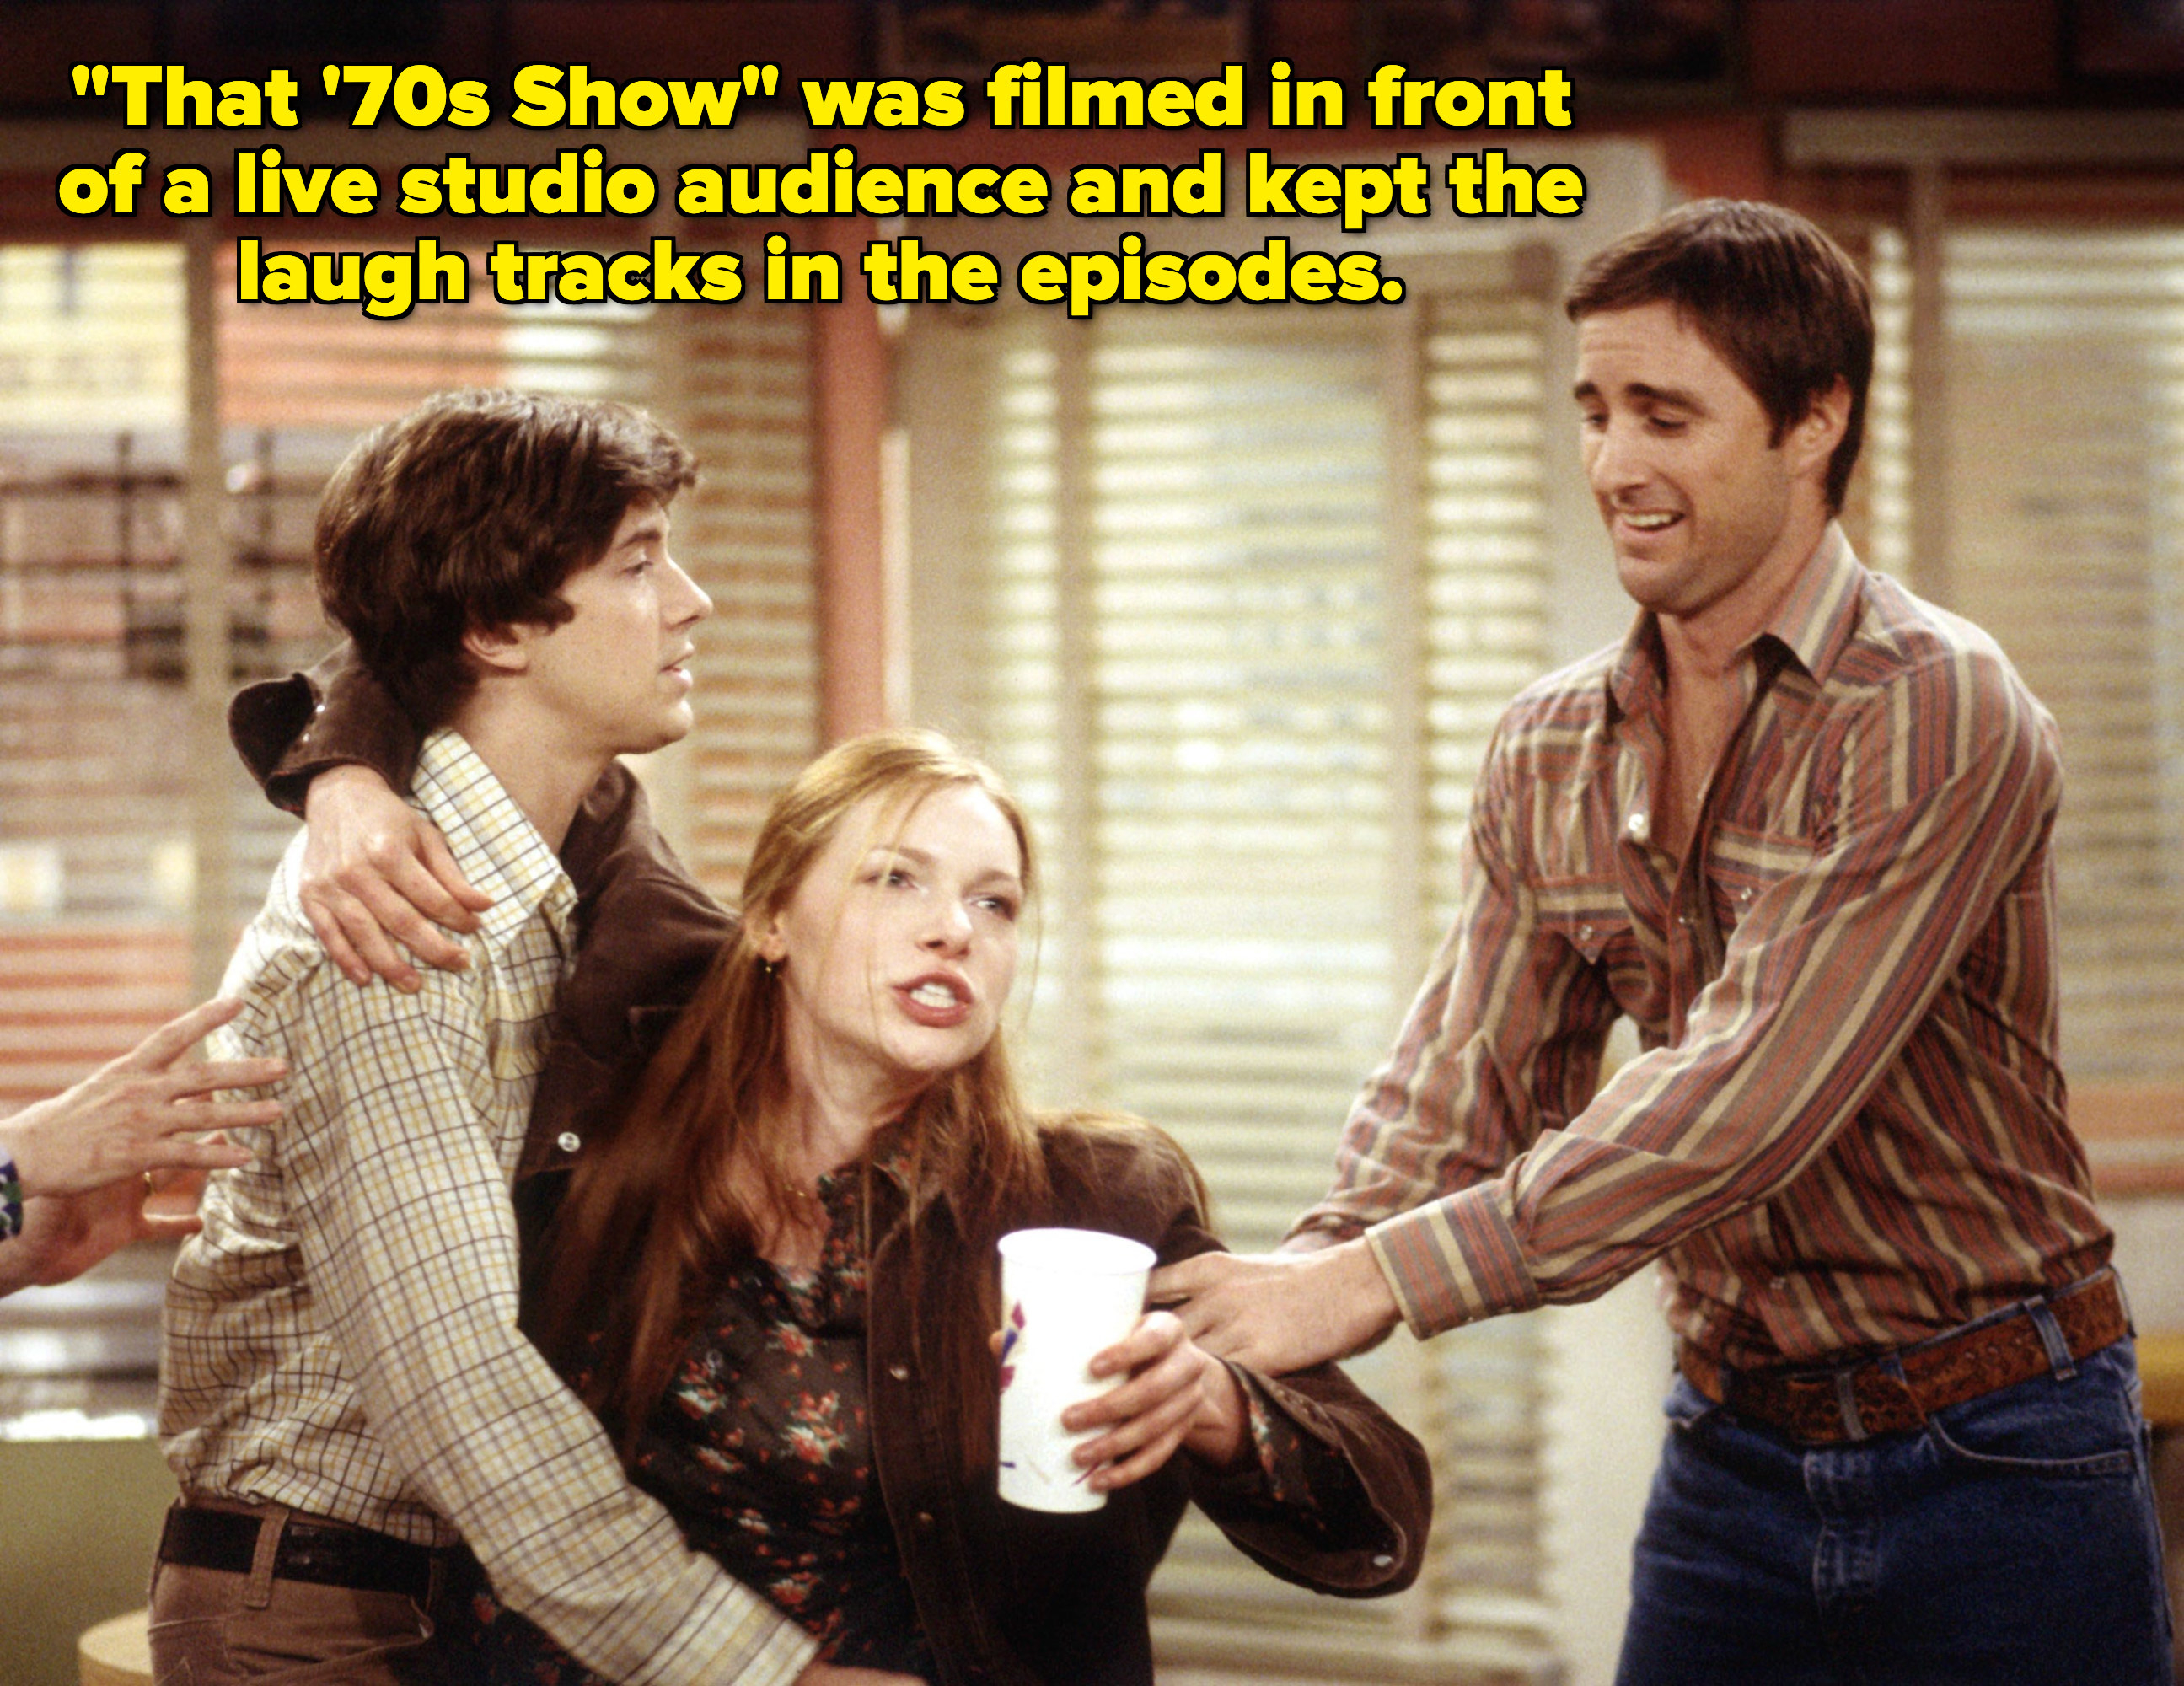 &quot;&#x27;That &#x27;70s Show&#x27; was filmed in front of a live studio audience and kept the laugh tracks in the episodes.&quot;